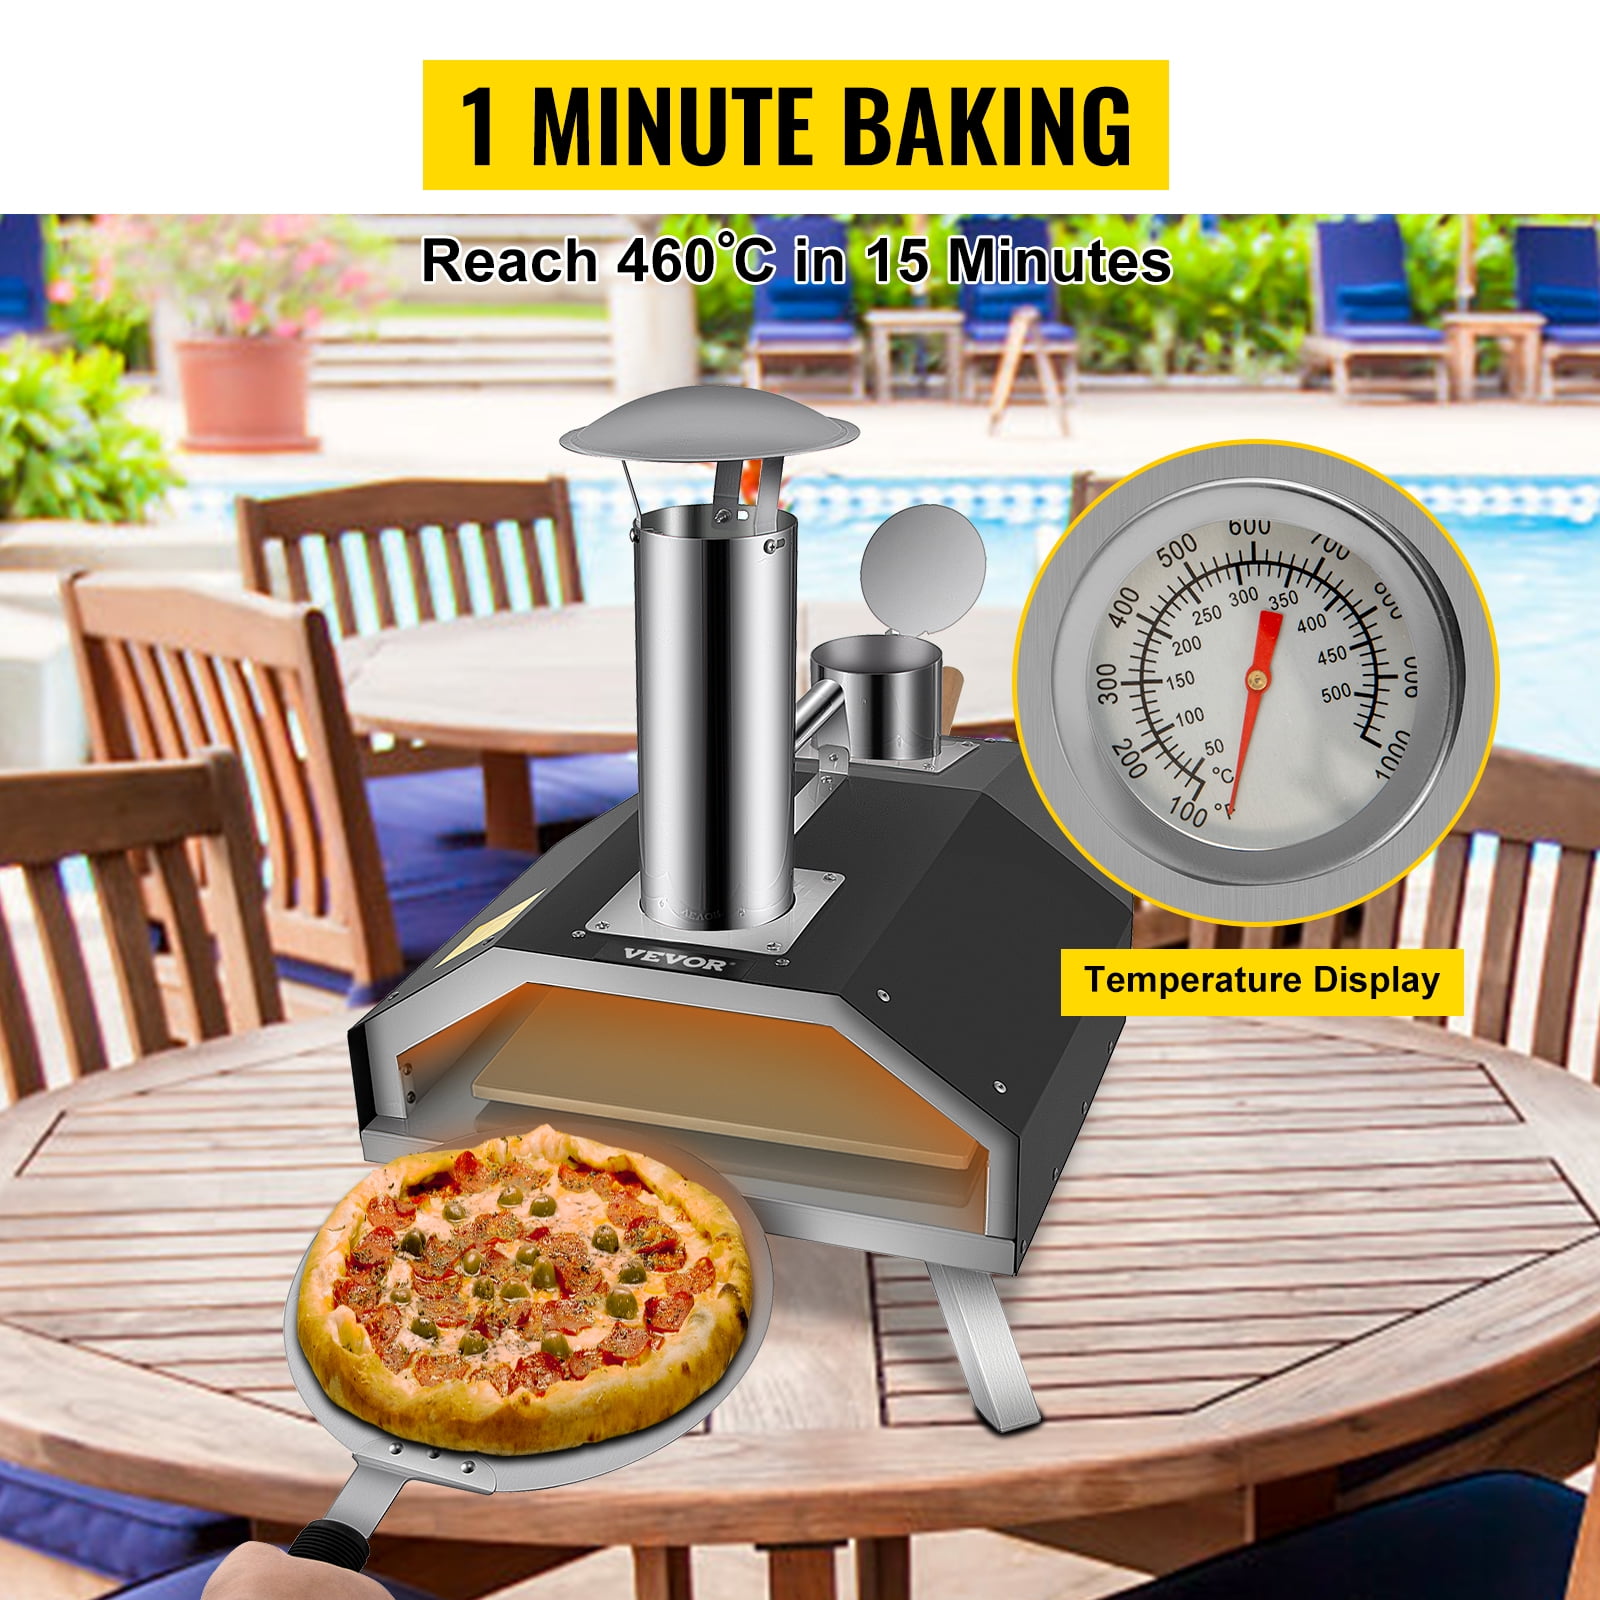 VEVORbrand Portable Pizza Oven, 12 Pellet Pizza Oven, Stainless Steel Pizza  Oven Outdoor, Wood Burning Pizza Oven with Foldable Feet Wood Oven with  Complete Accessories & Pizza Bag 